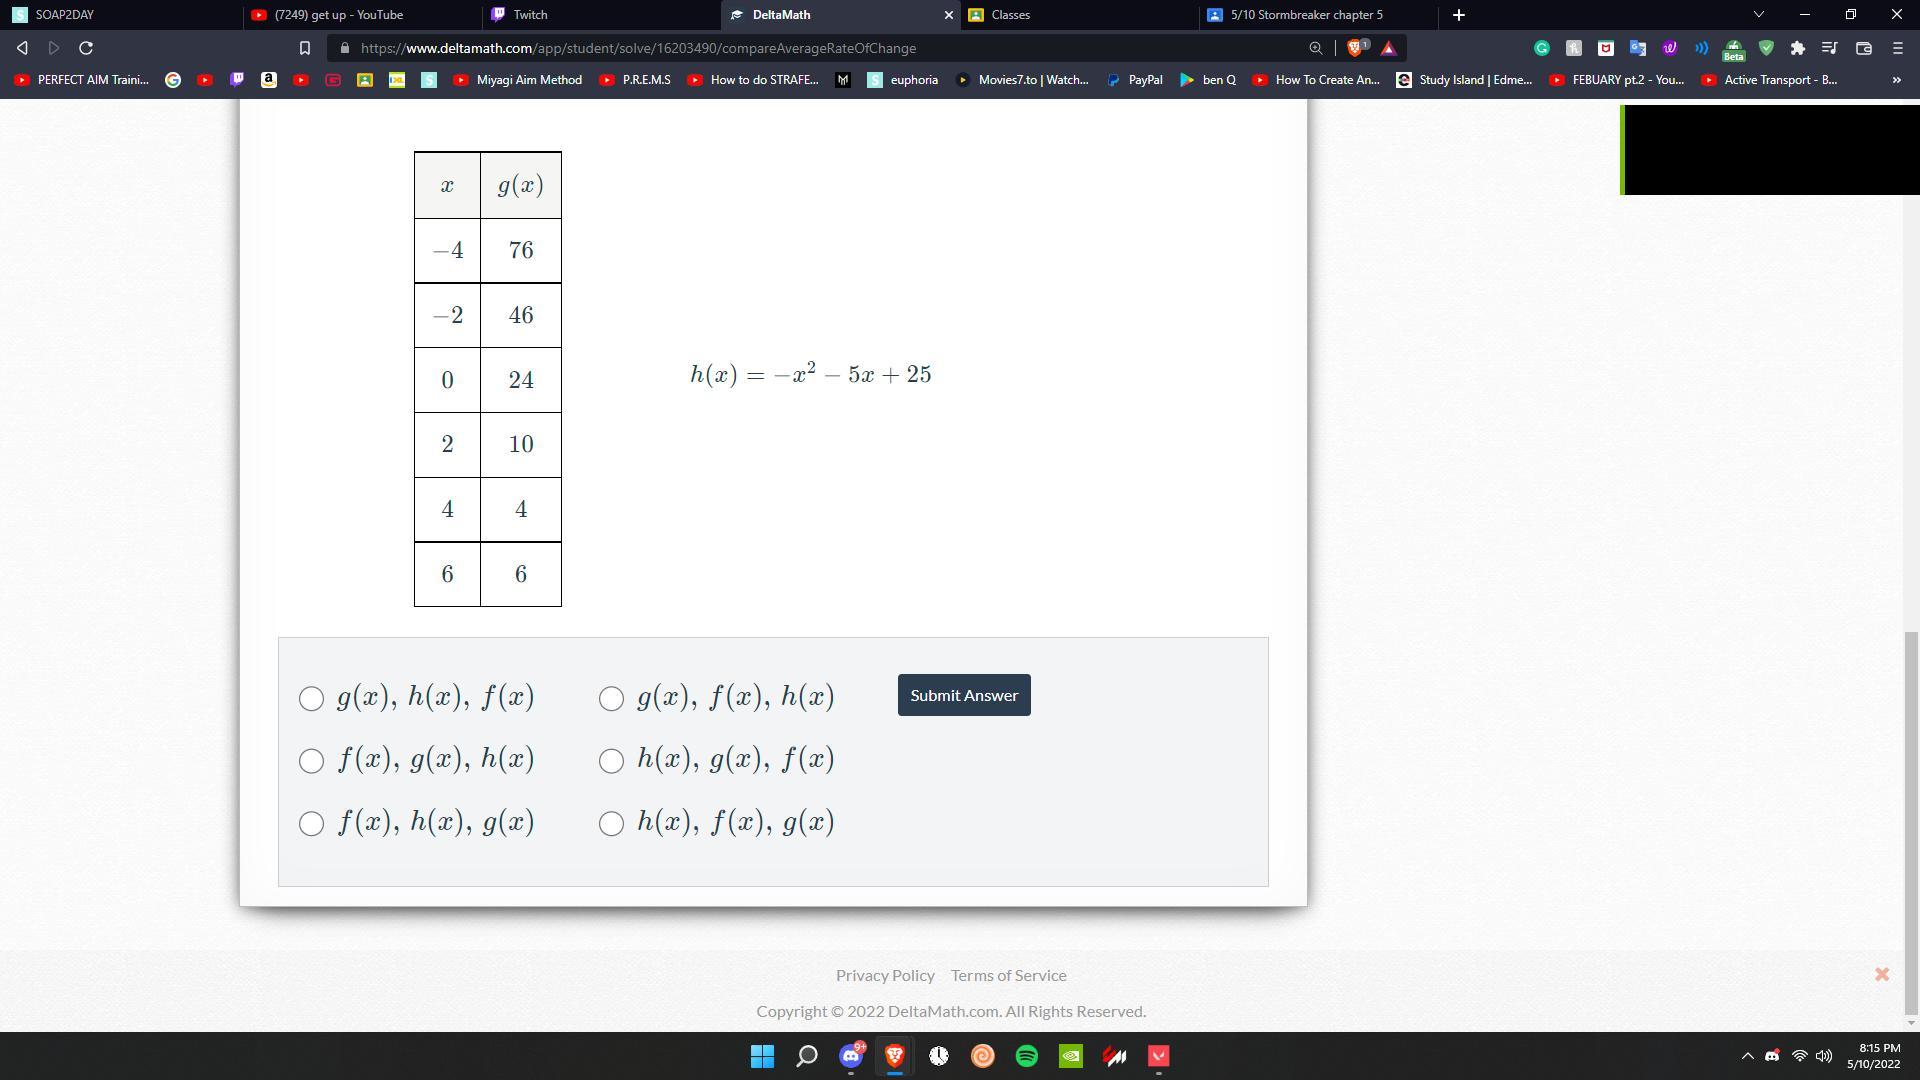 The Functions F(x), G(x), And H(x) Are Shown Below. Select The Option That Represents The Ordering Of